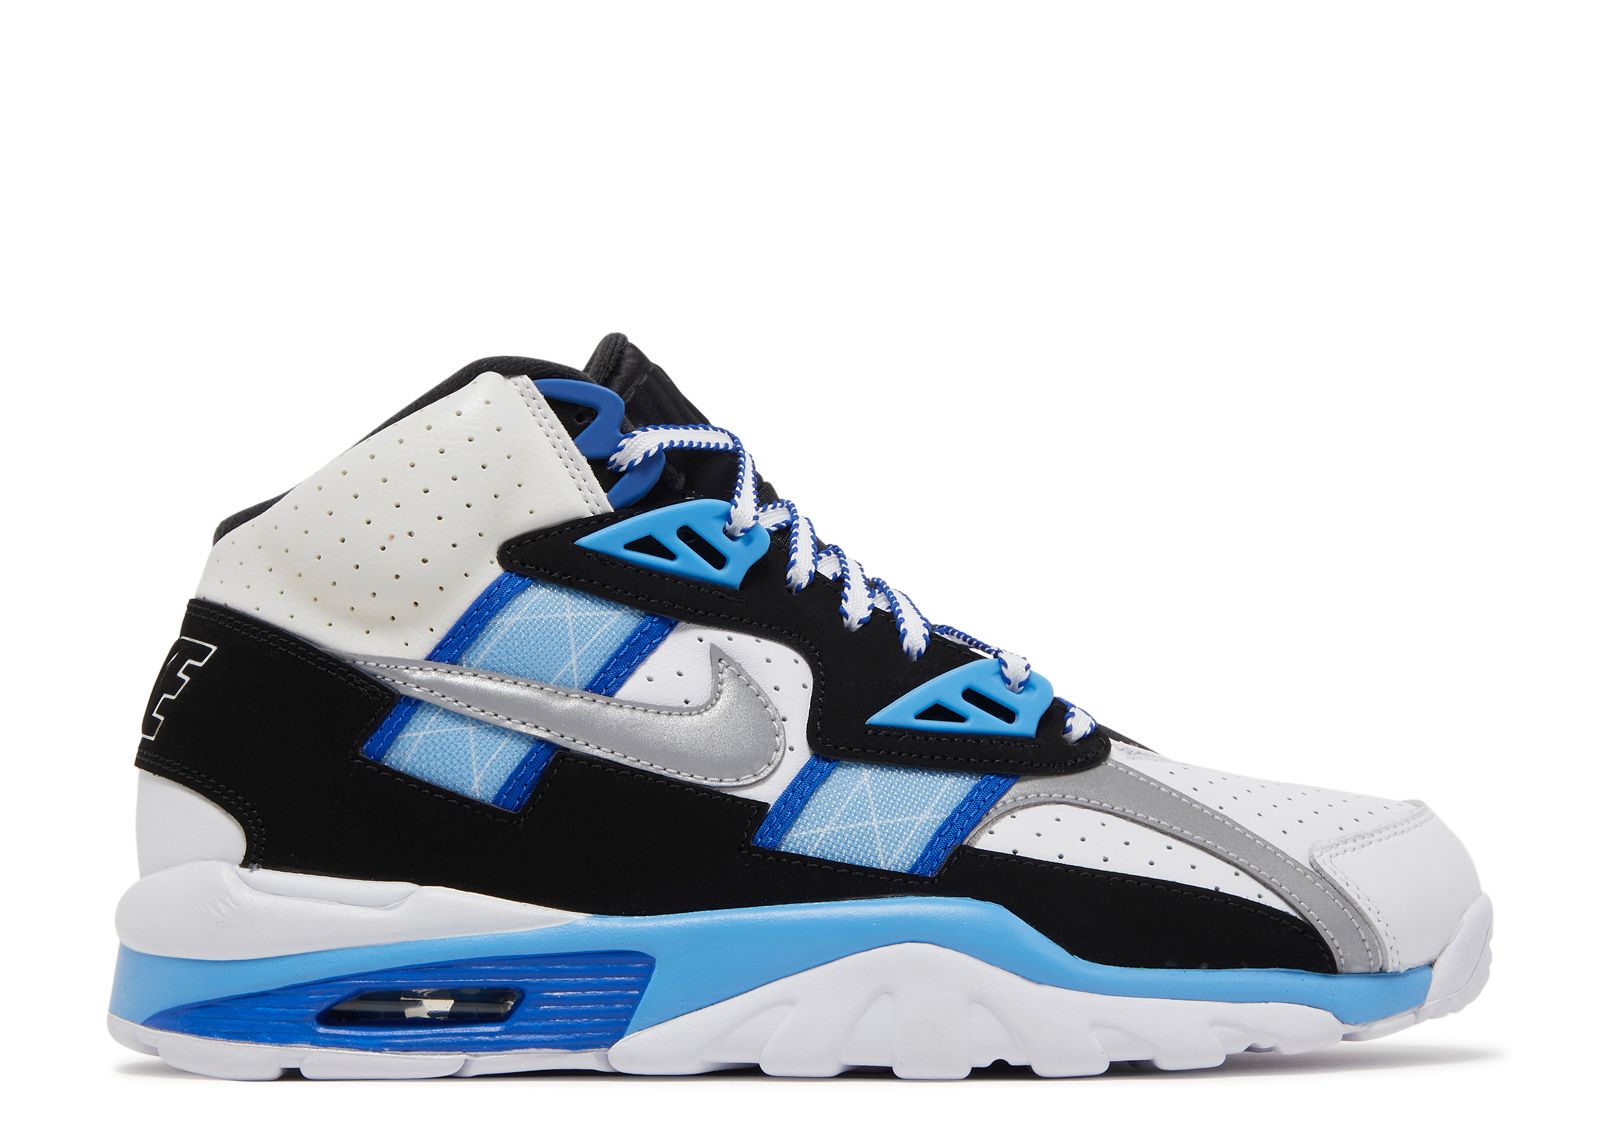 Nike Air Trainer SC Royals Release Info